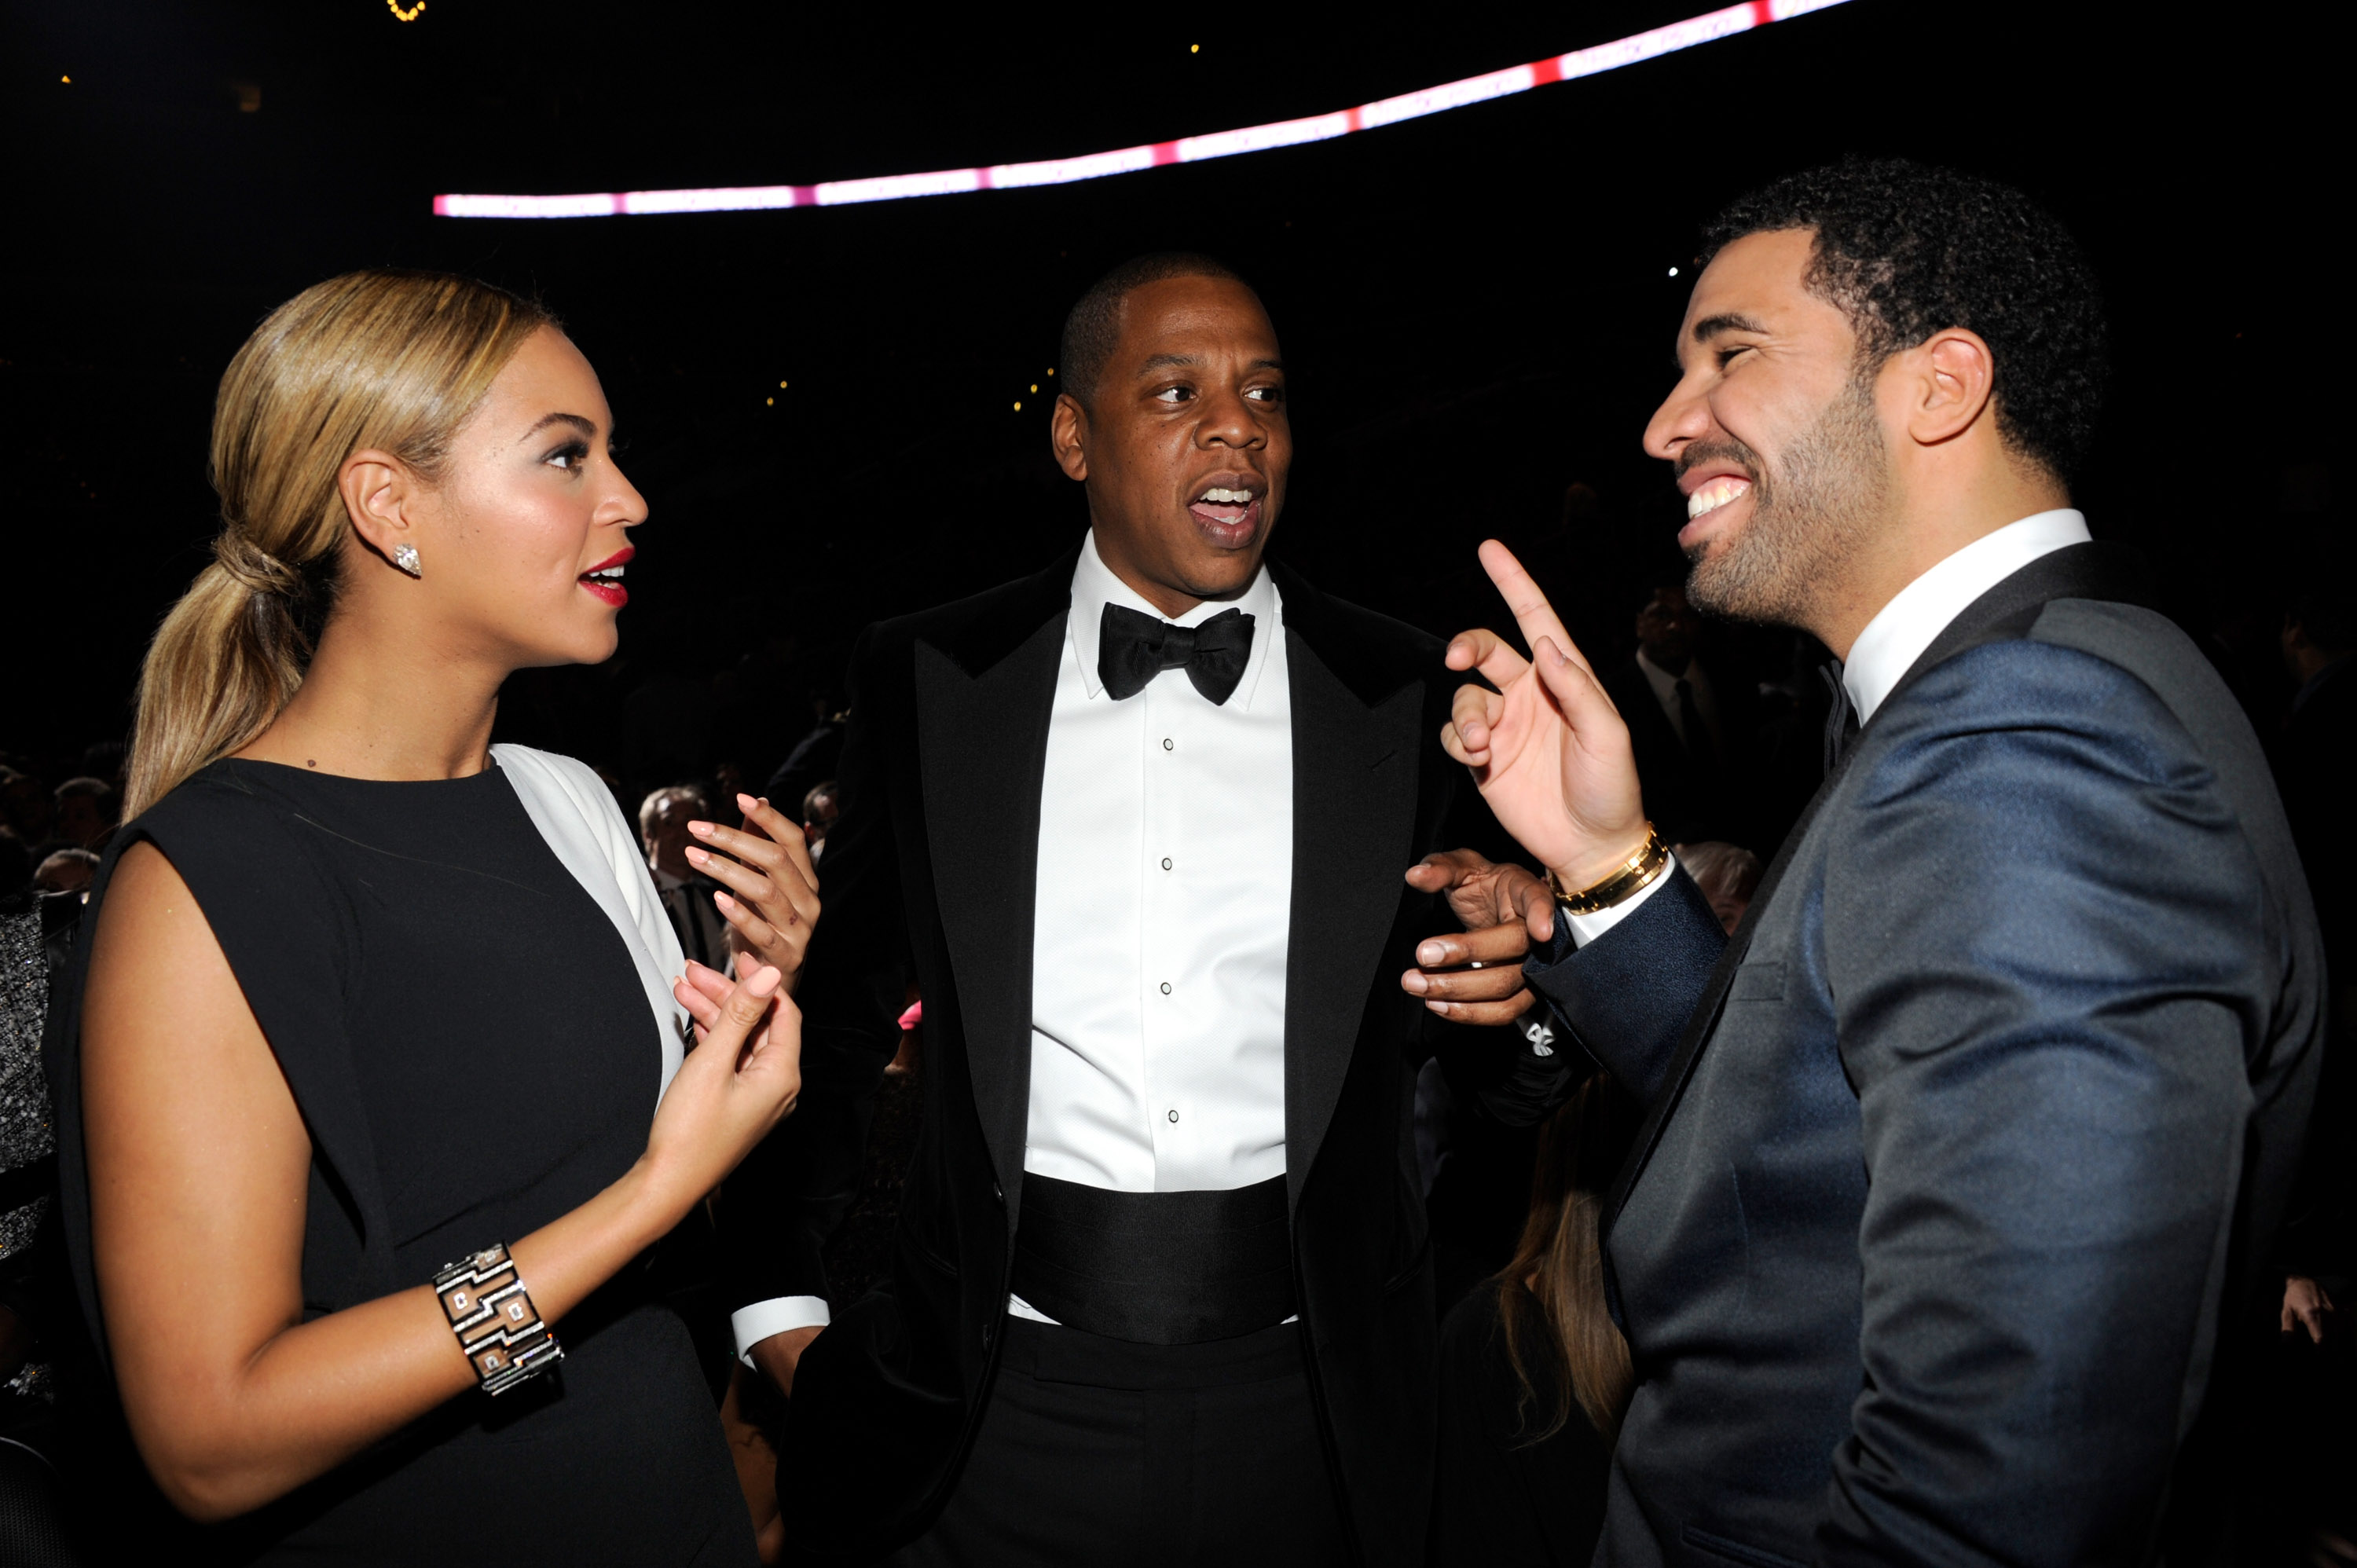 LOS ANGELES, CA - FEBRUARY 10:  Beyonce, Jay-Z and Drake attend the 55th Annual GRAMMY Awards at STAPLES Center on February 10, 2013 in Los Angeles, California.  (Photo by Kevin Mazur/WireImage)